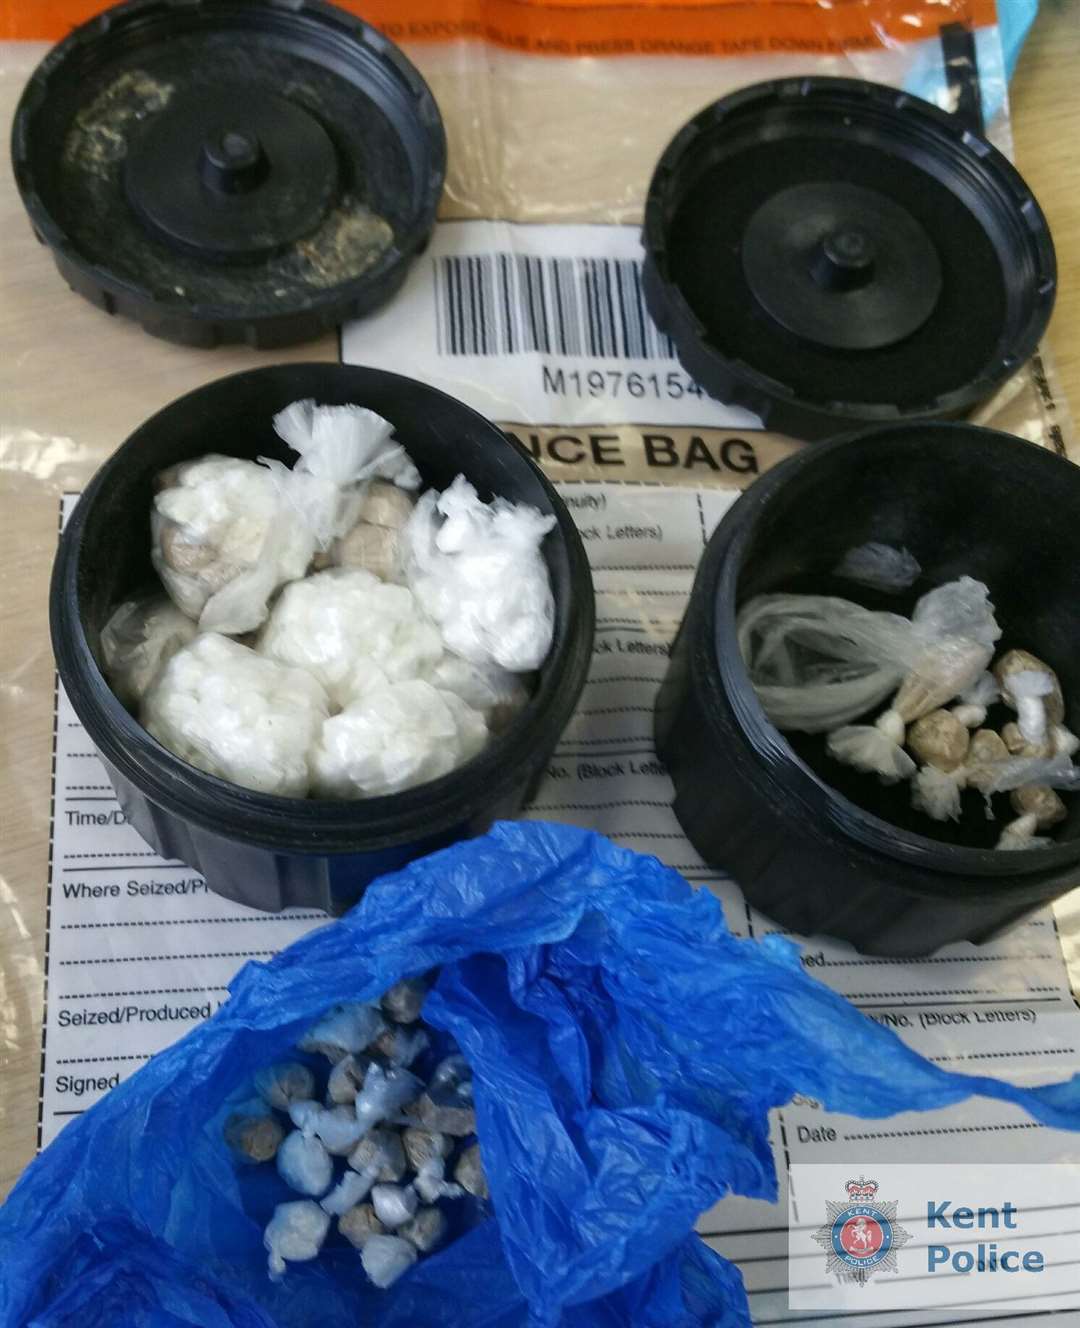 Suspected class A drugs were found in magnetic pots under a car on Sunday. Picture: Kent Police (13831665)